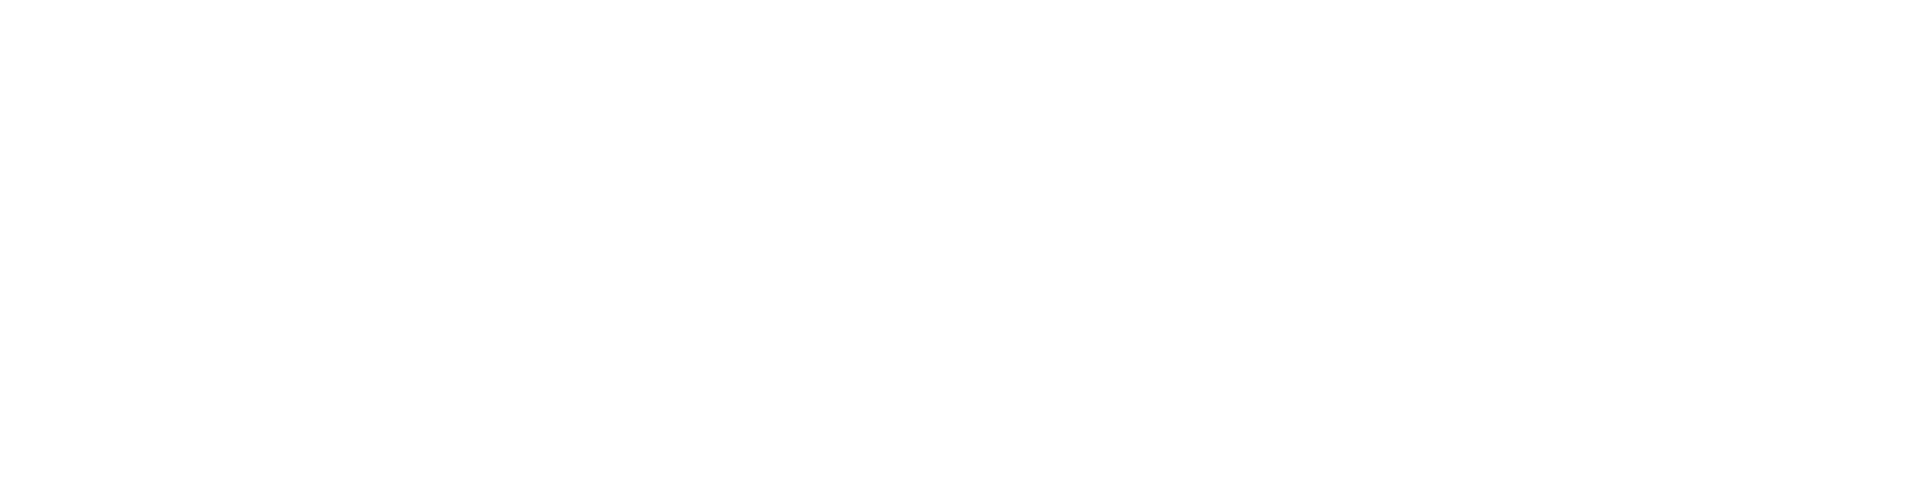 The Scuffed Series 6 - Dodge the Walls